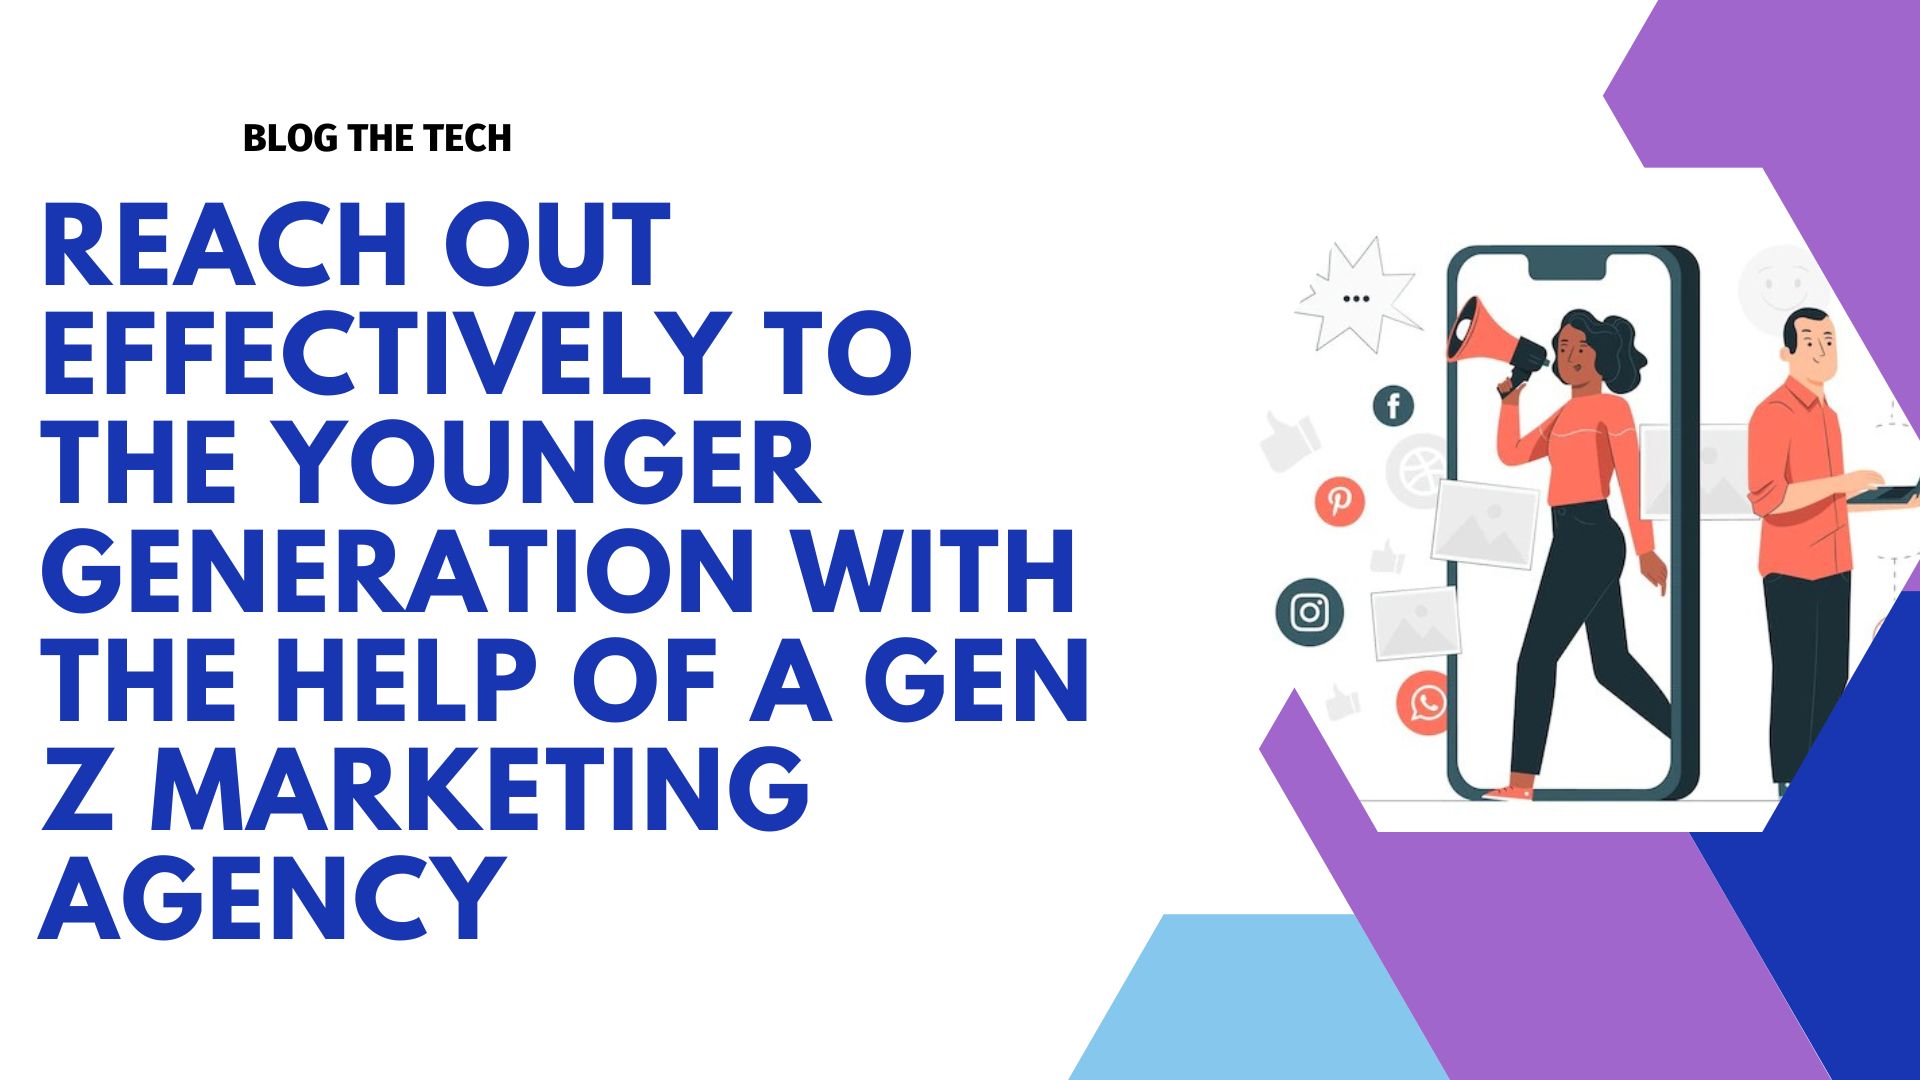 Reach Out Effectively To The Younger Generation With The Help Of A Gen Z Marketing Agency